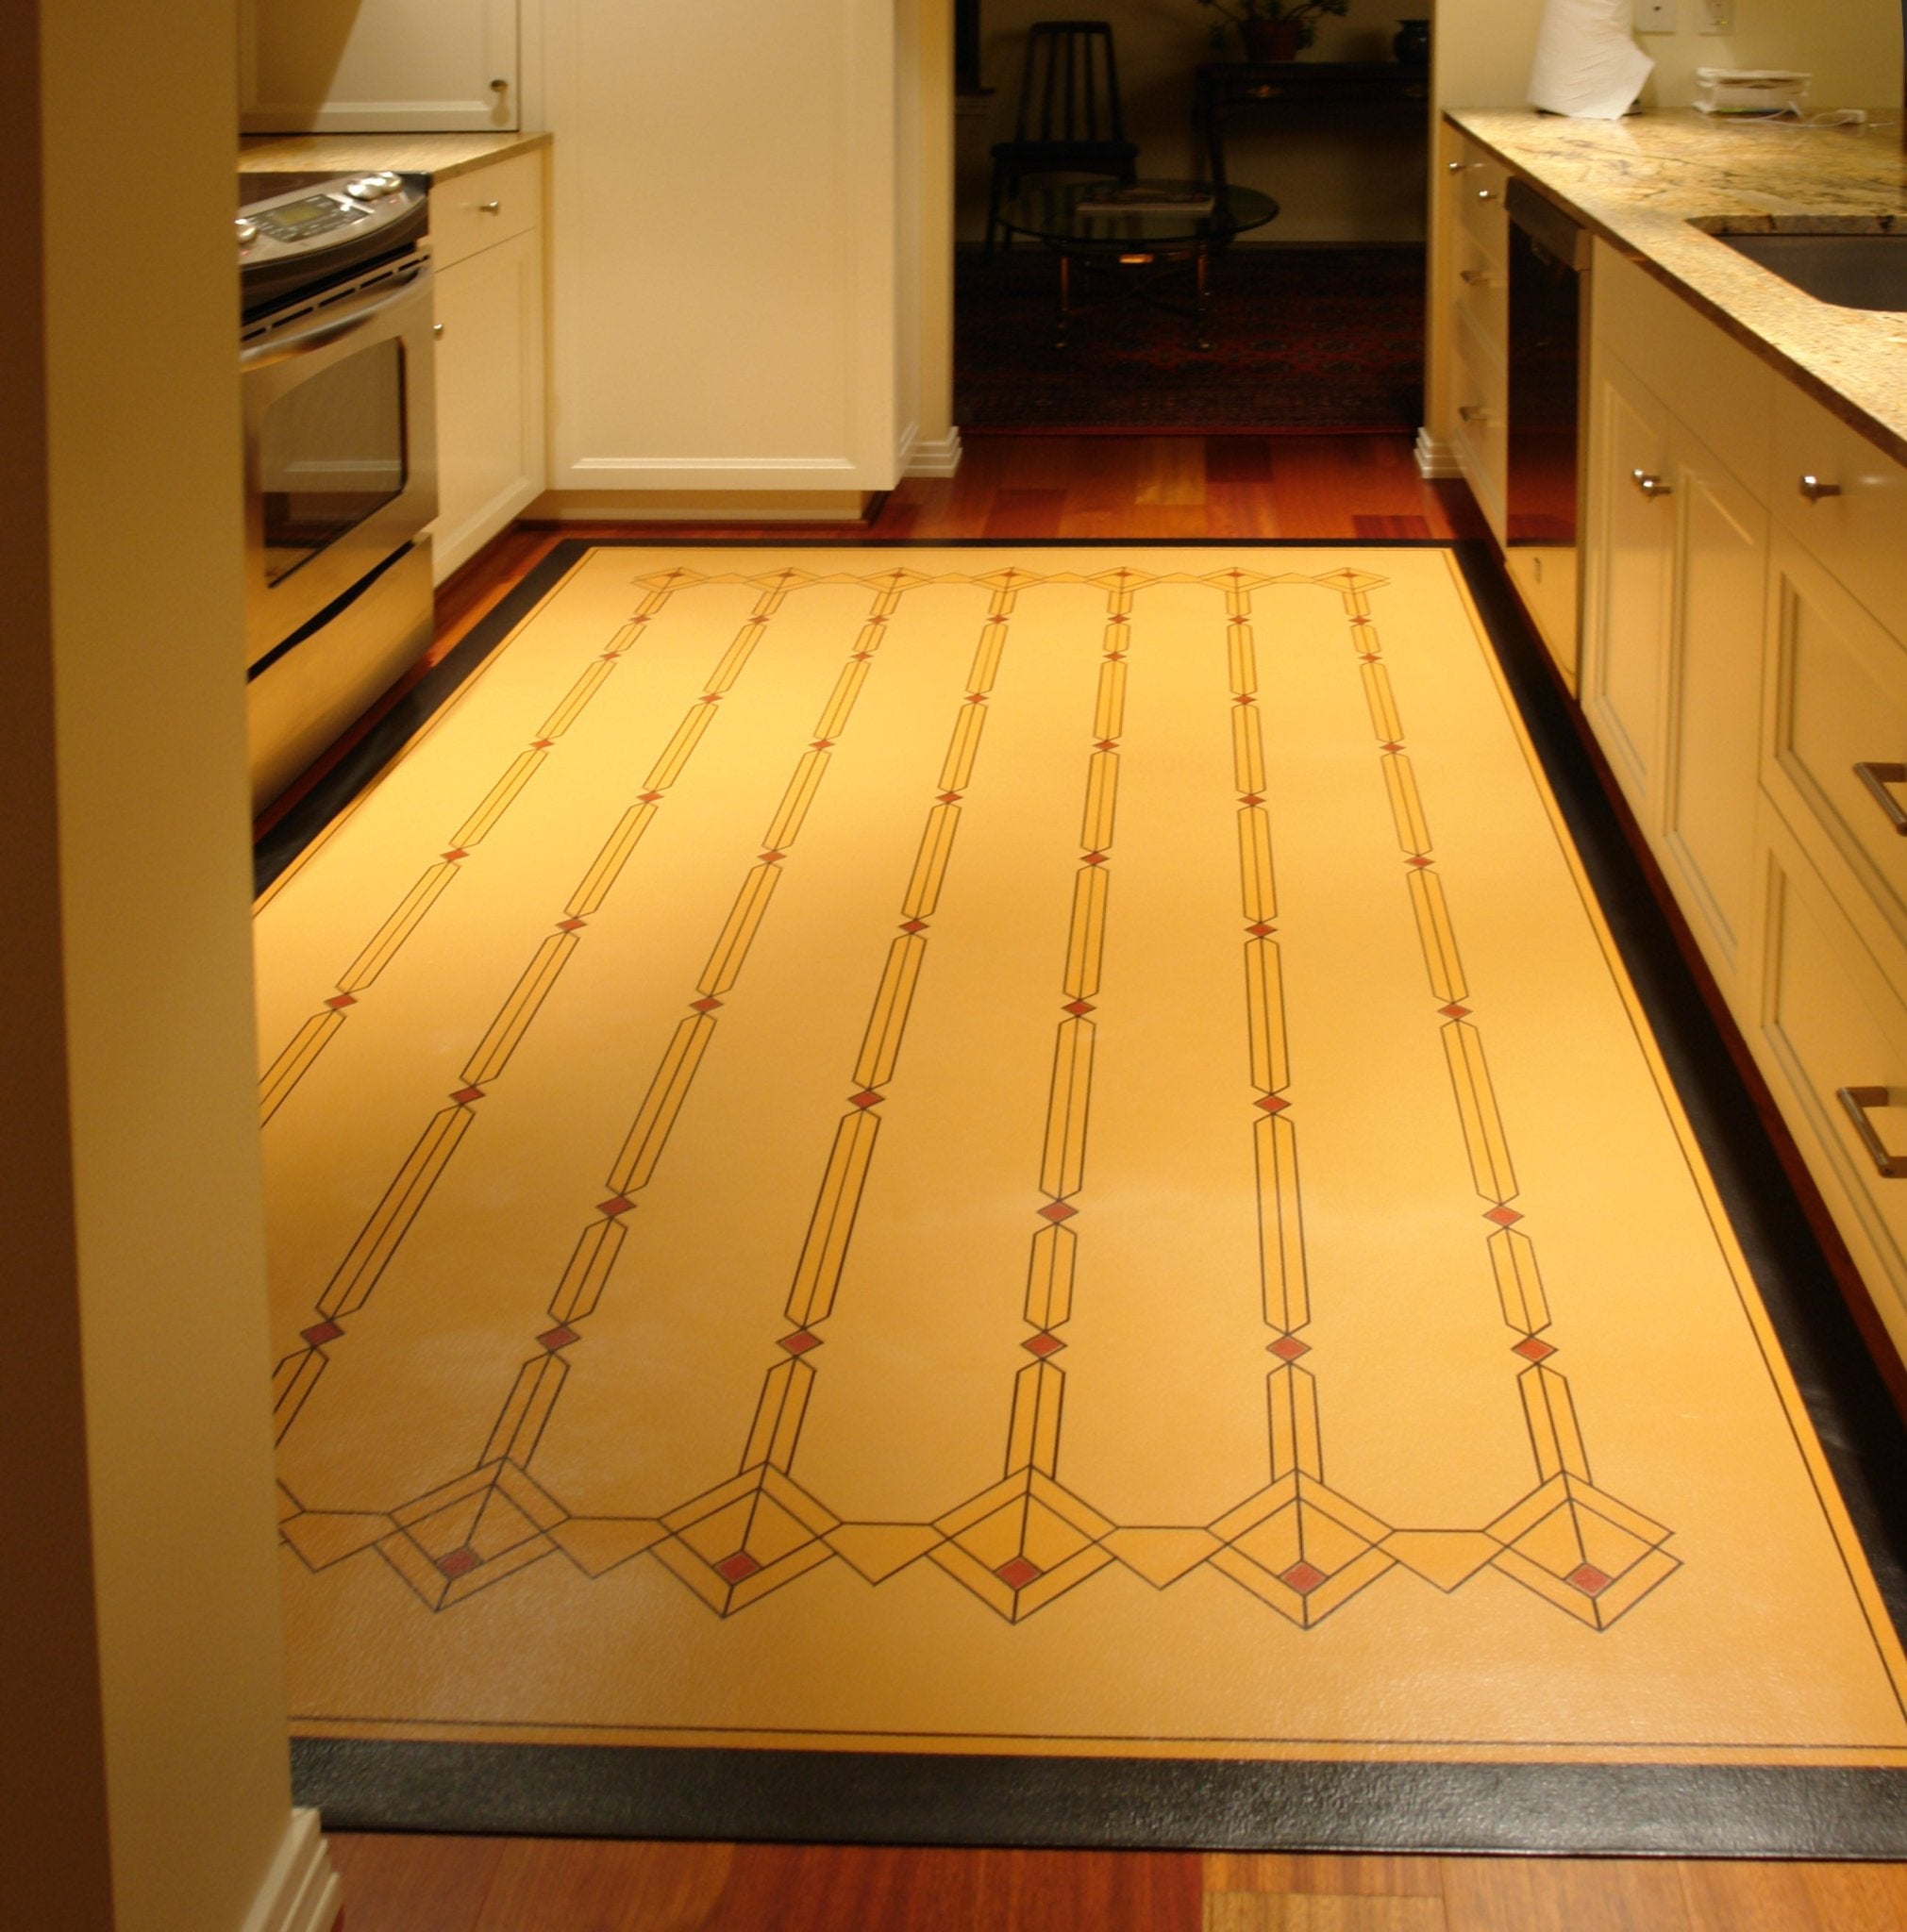 An in-situ image of Leaded Glass Floorcloth #2 in it's kitchen.